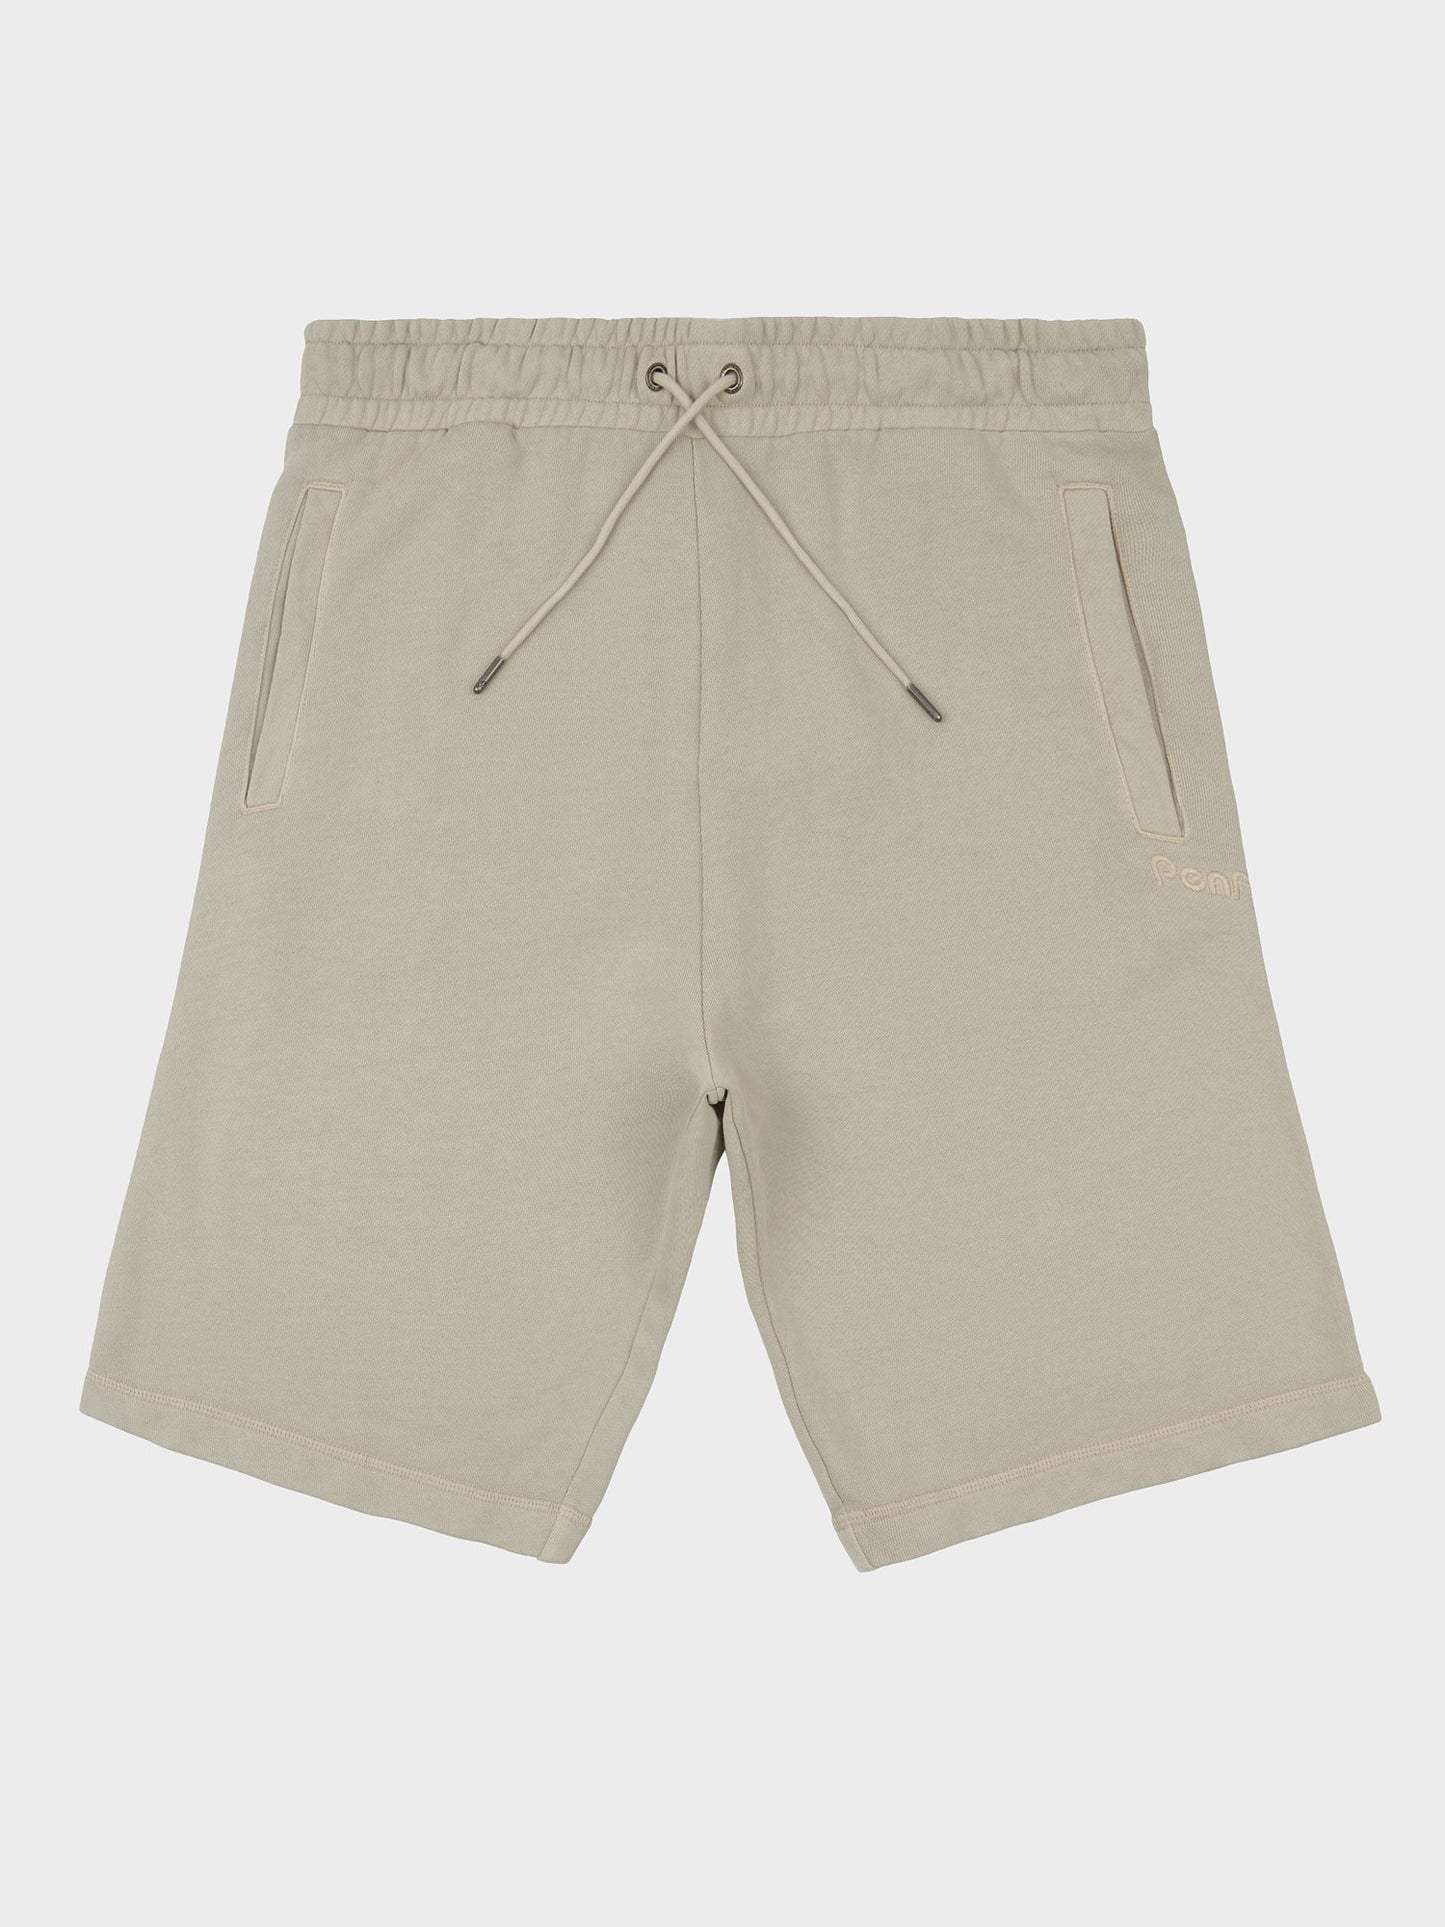 Washed Loopback Short in Silver Gray